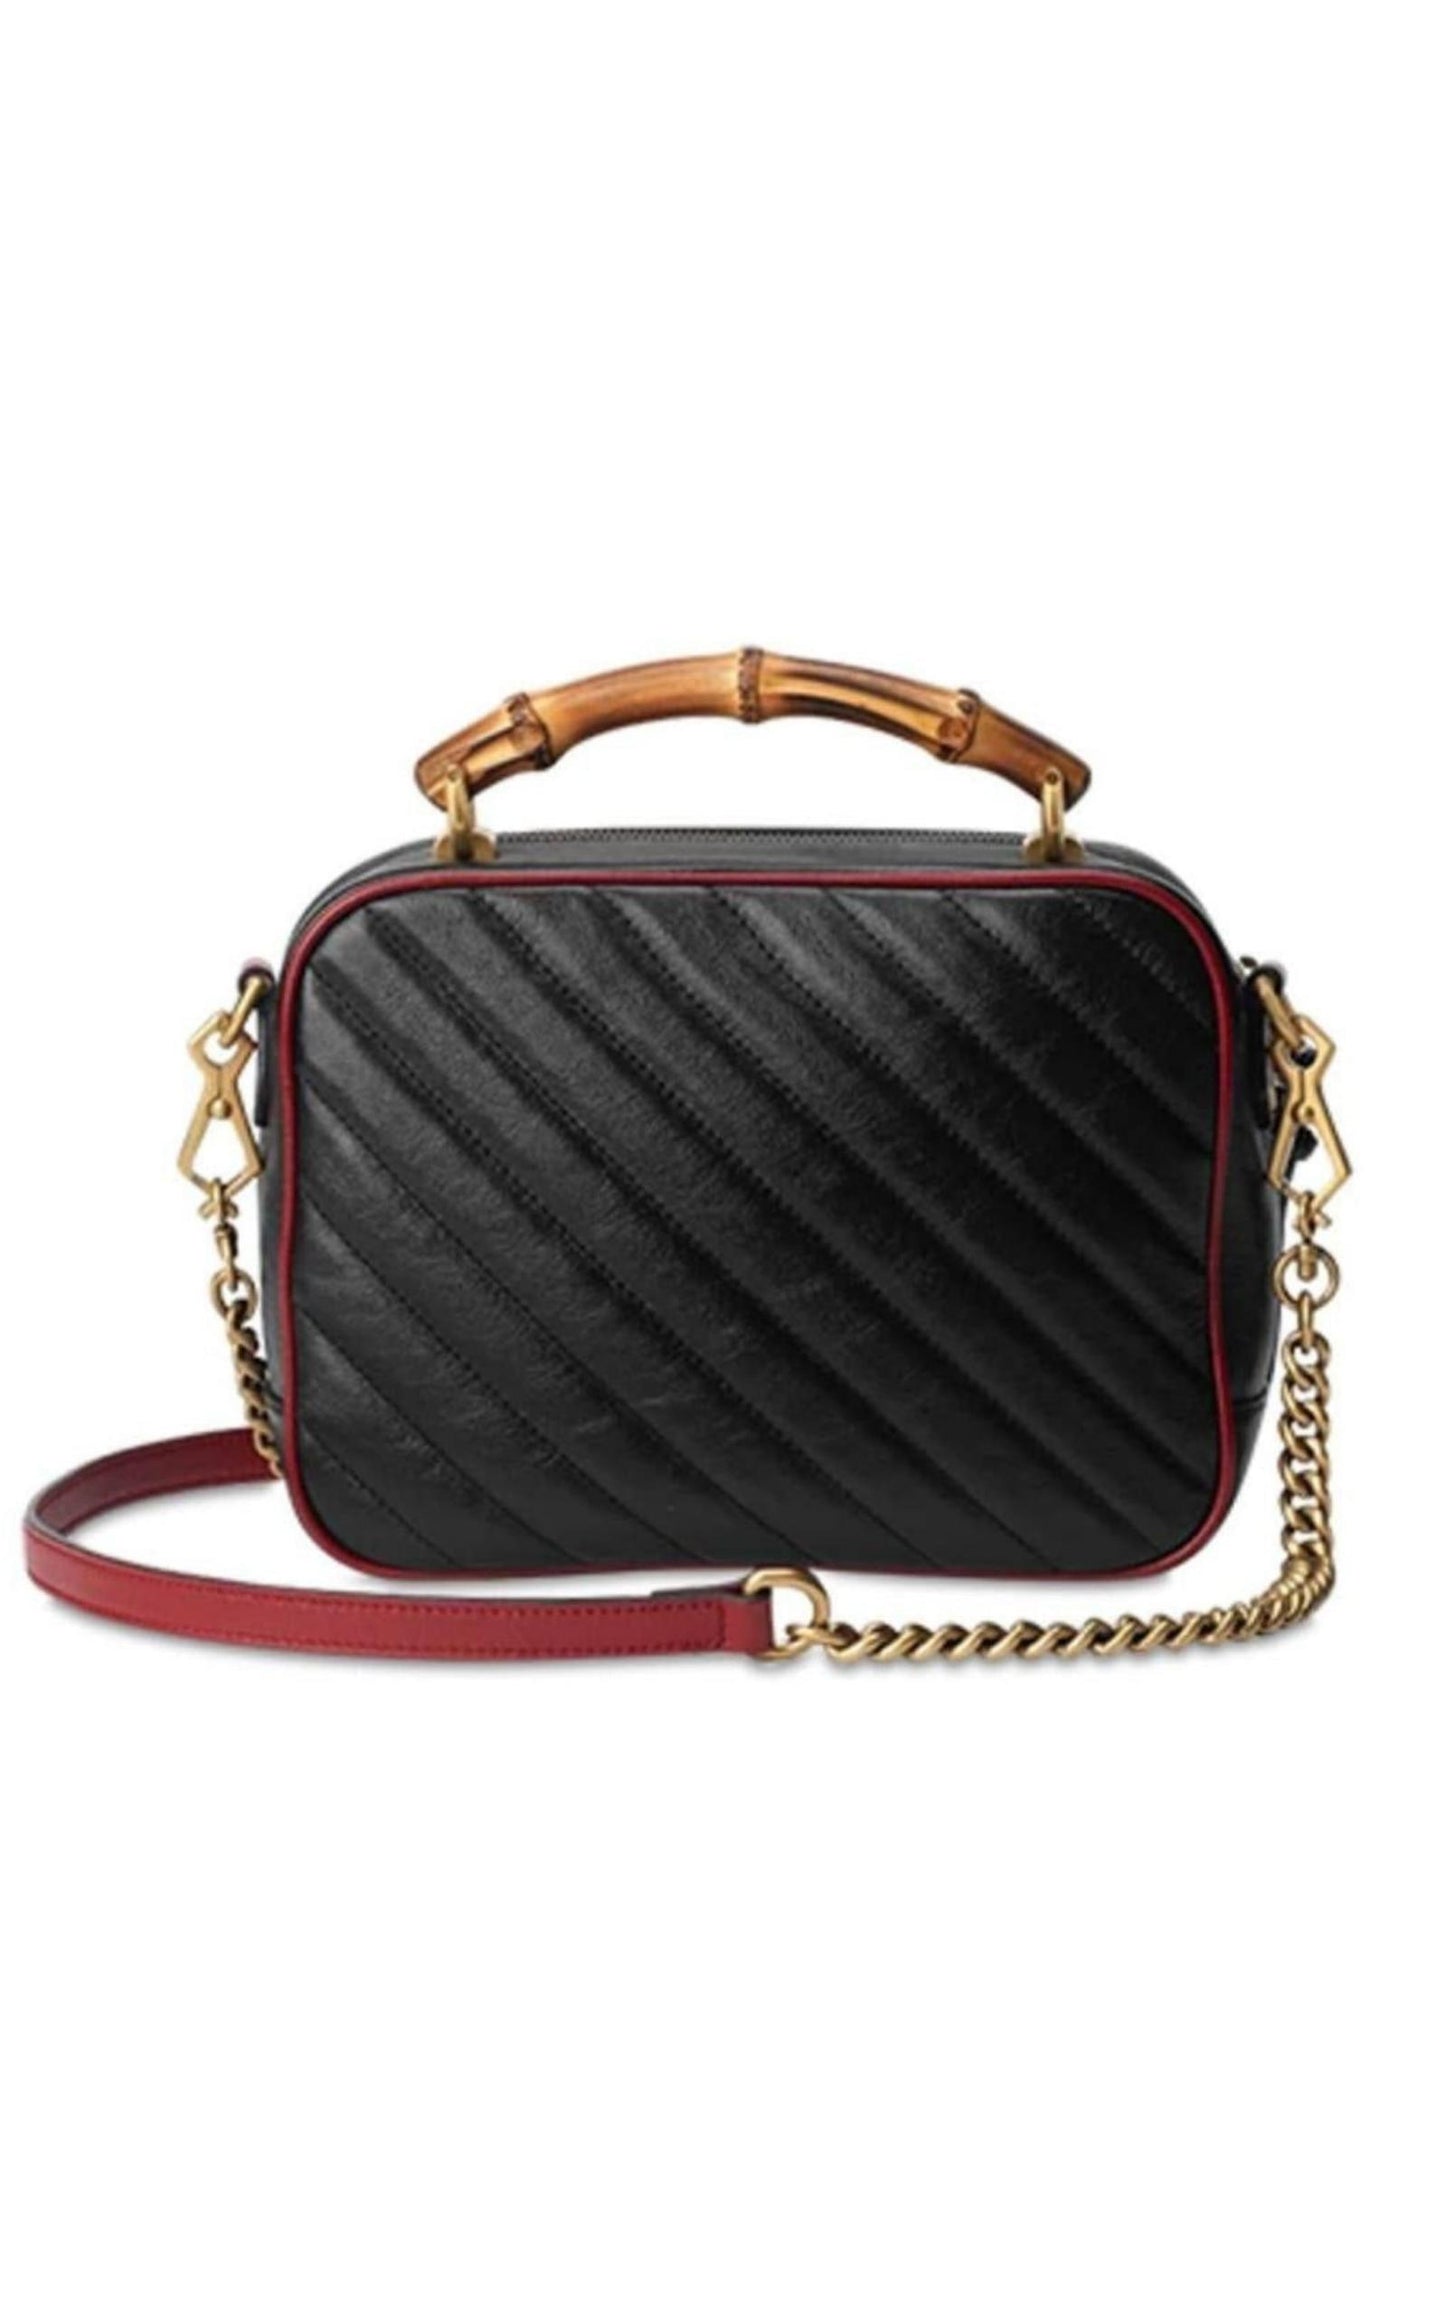 GG Marmont small shoulder bag in black